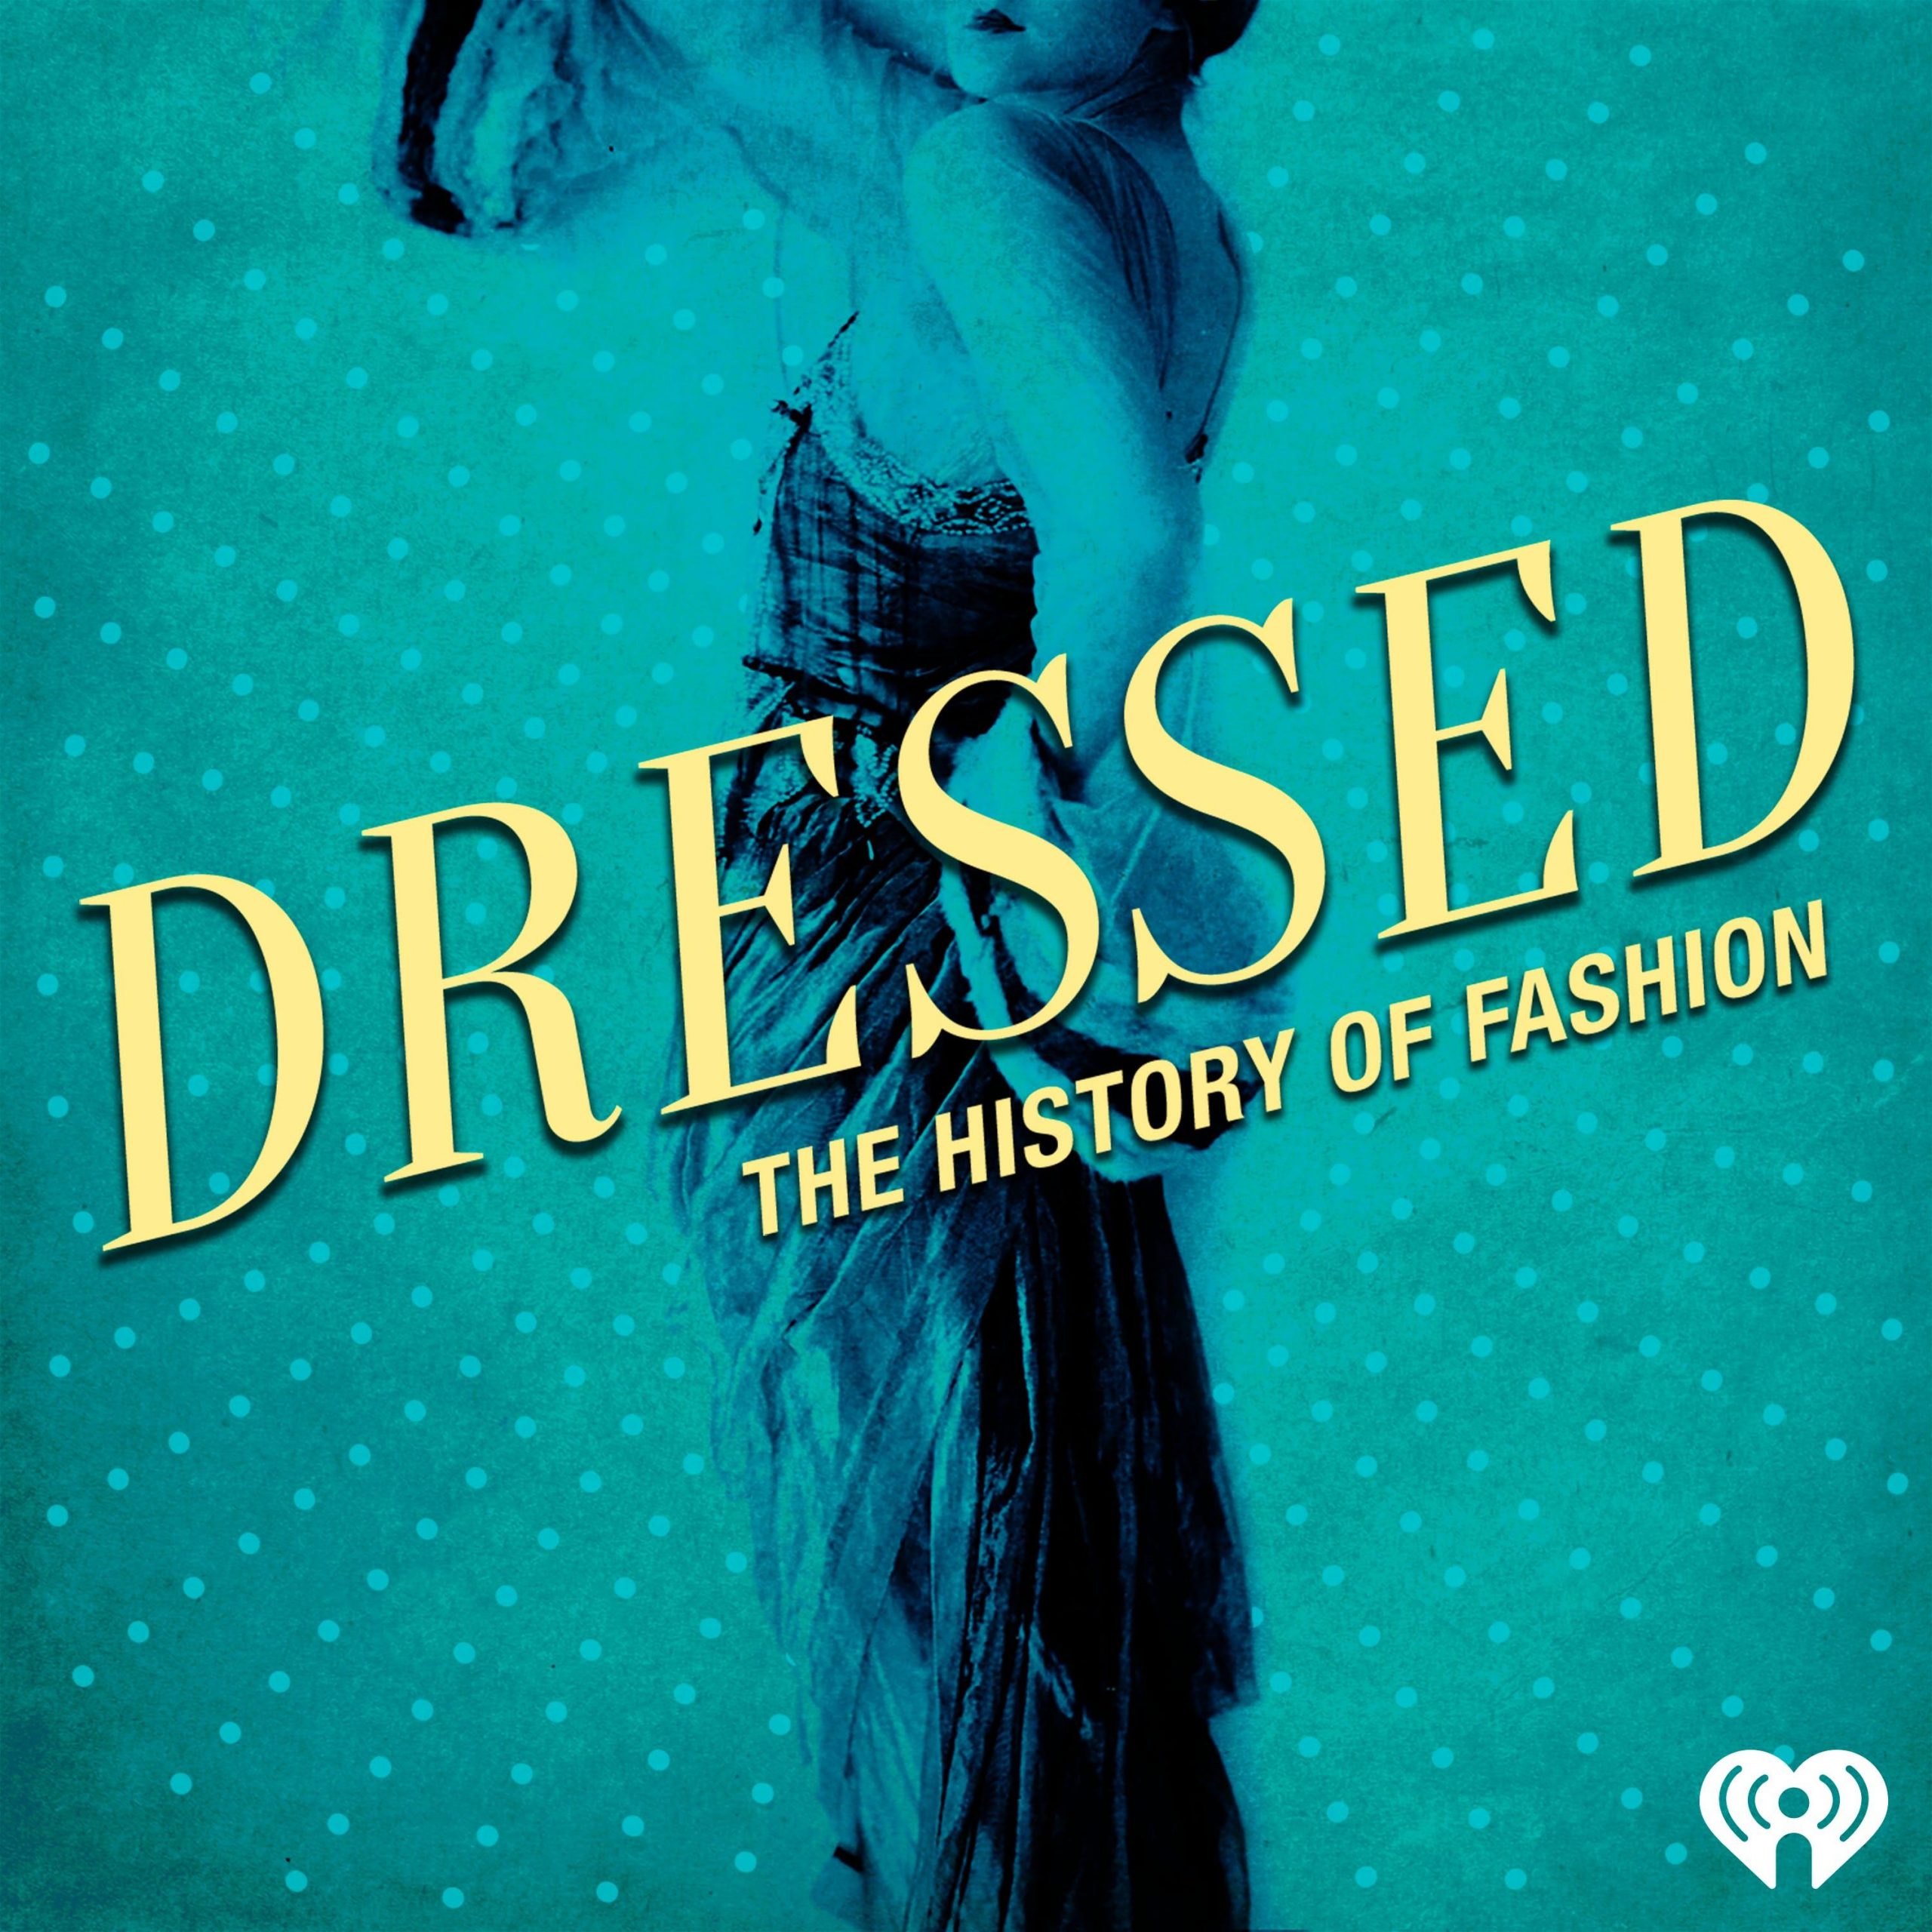 Dressed - The History of Fashion podcast